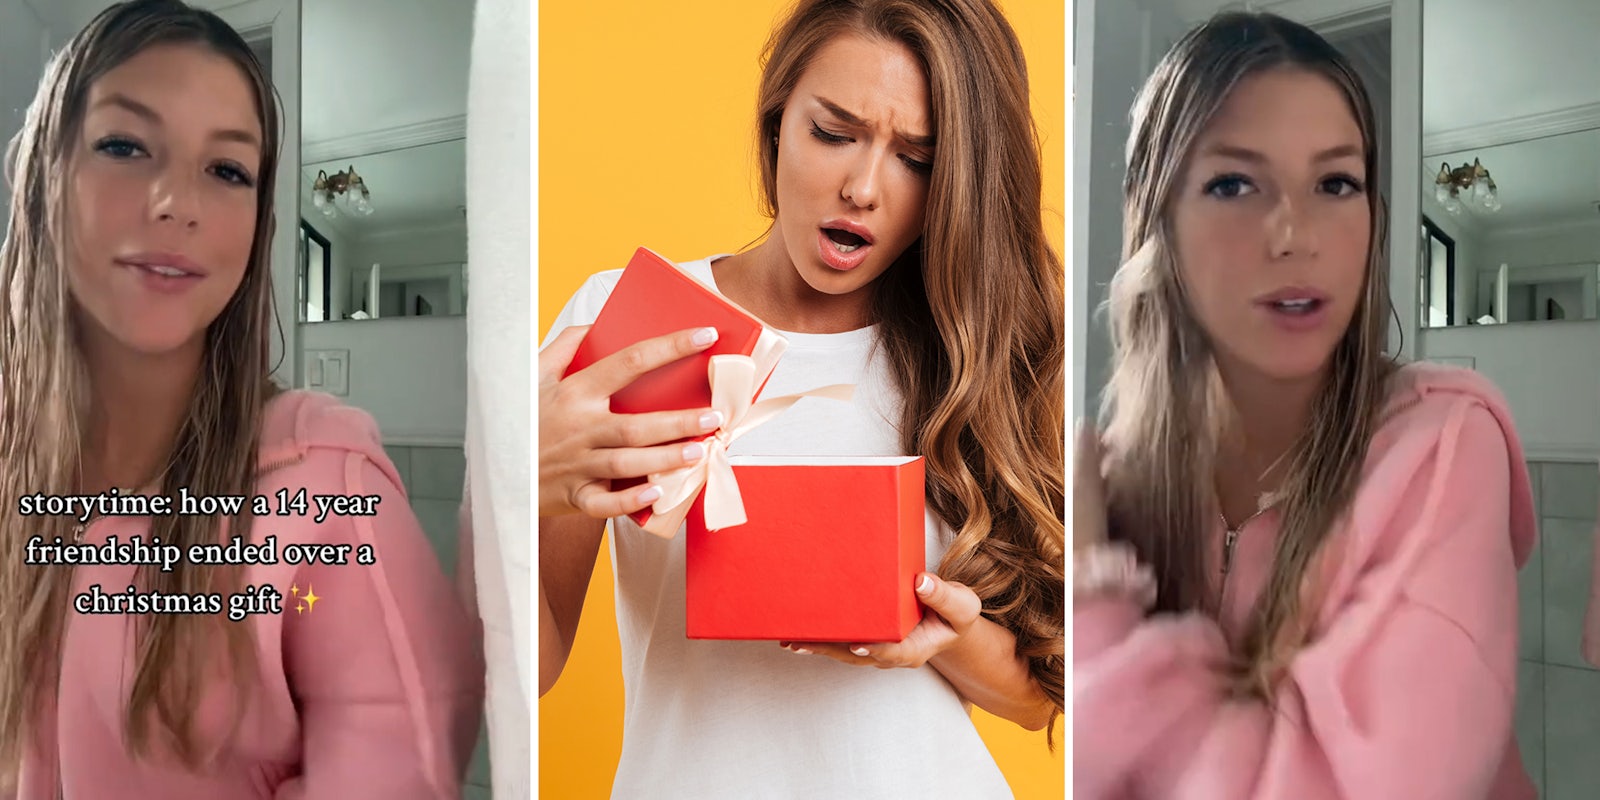 Woman says she ended a 14-year friendship over this Christmas present.